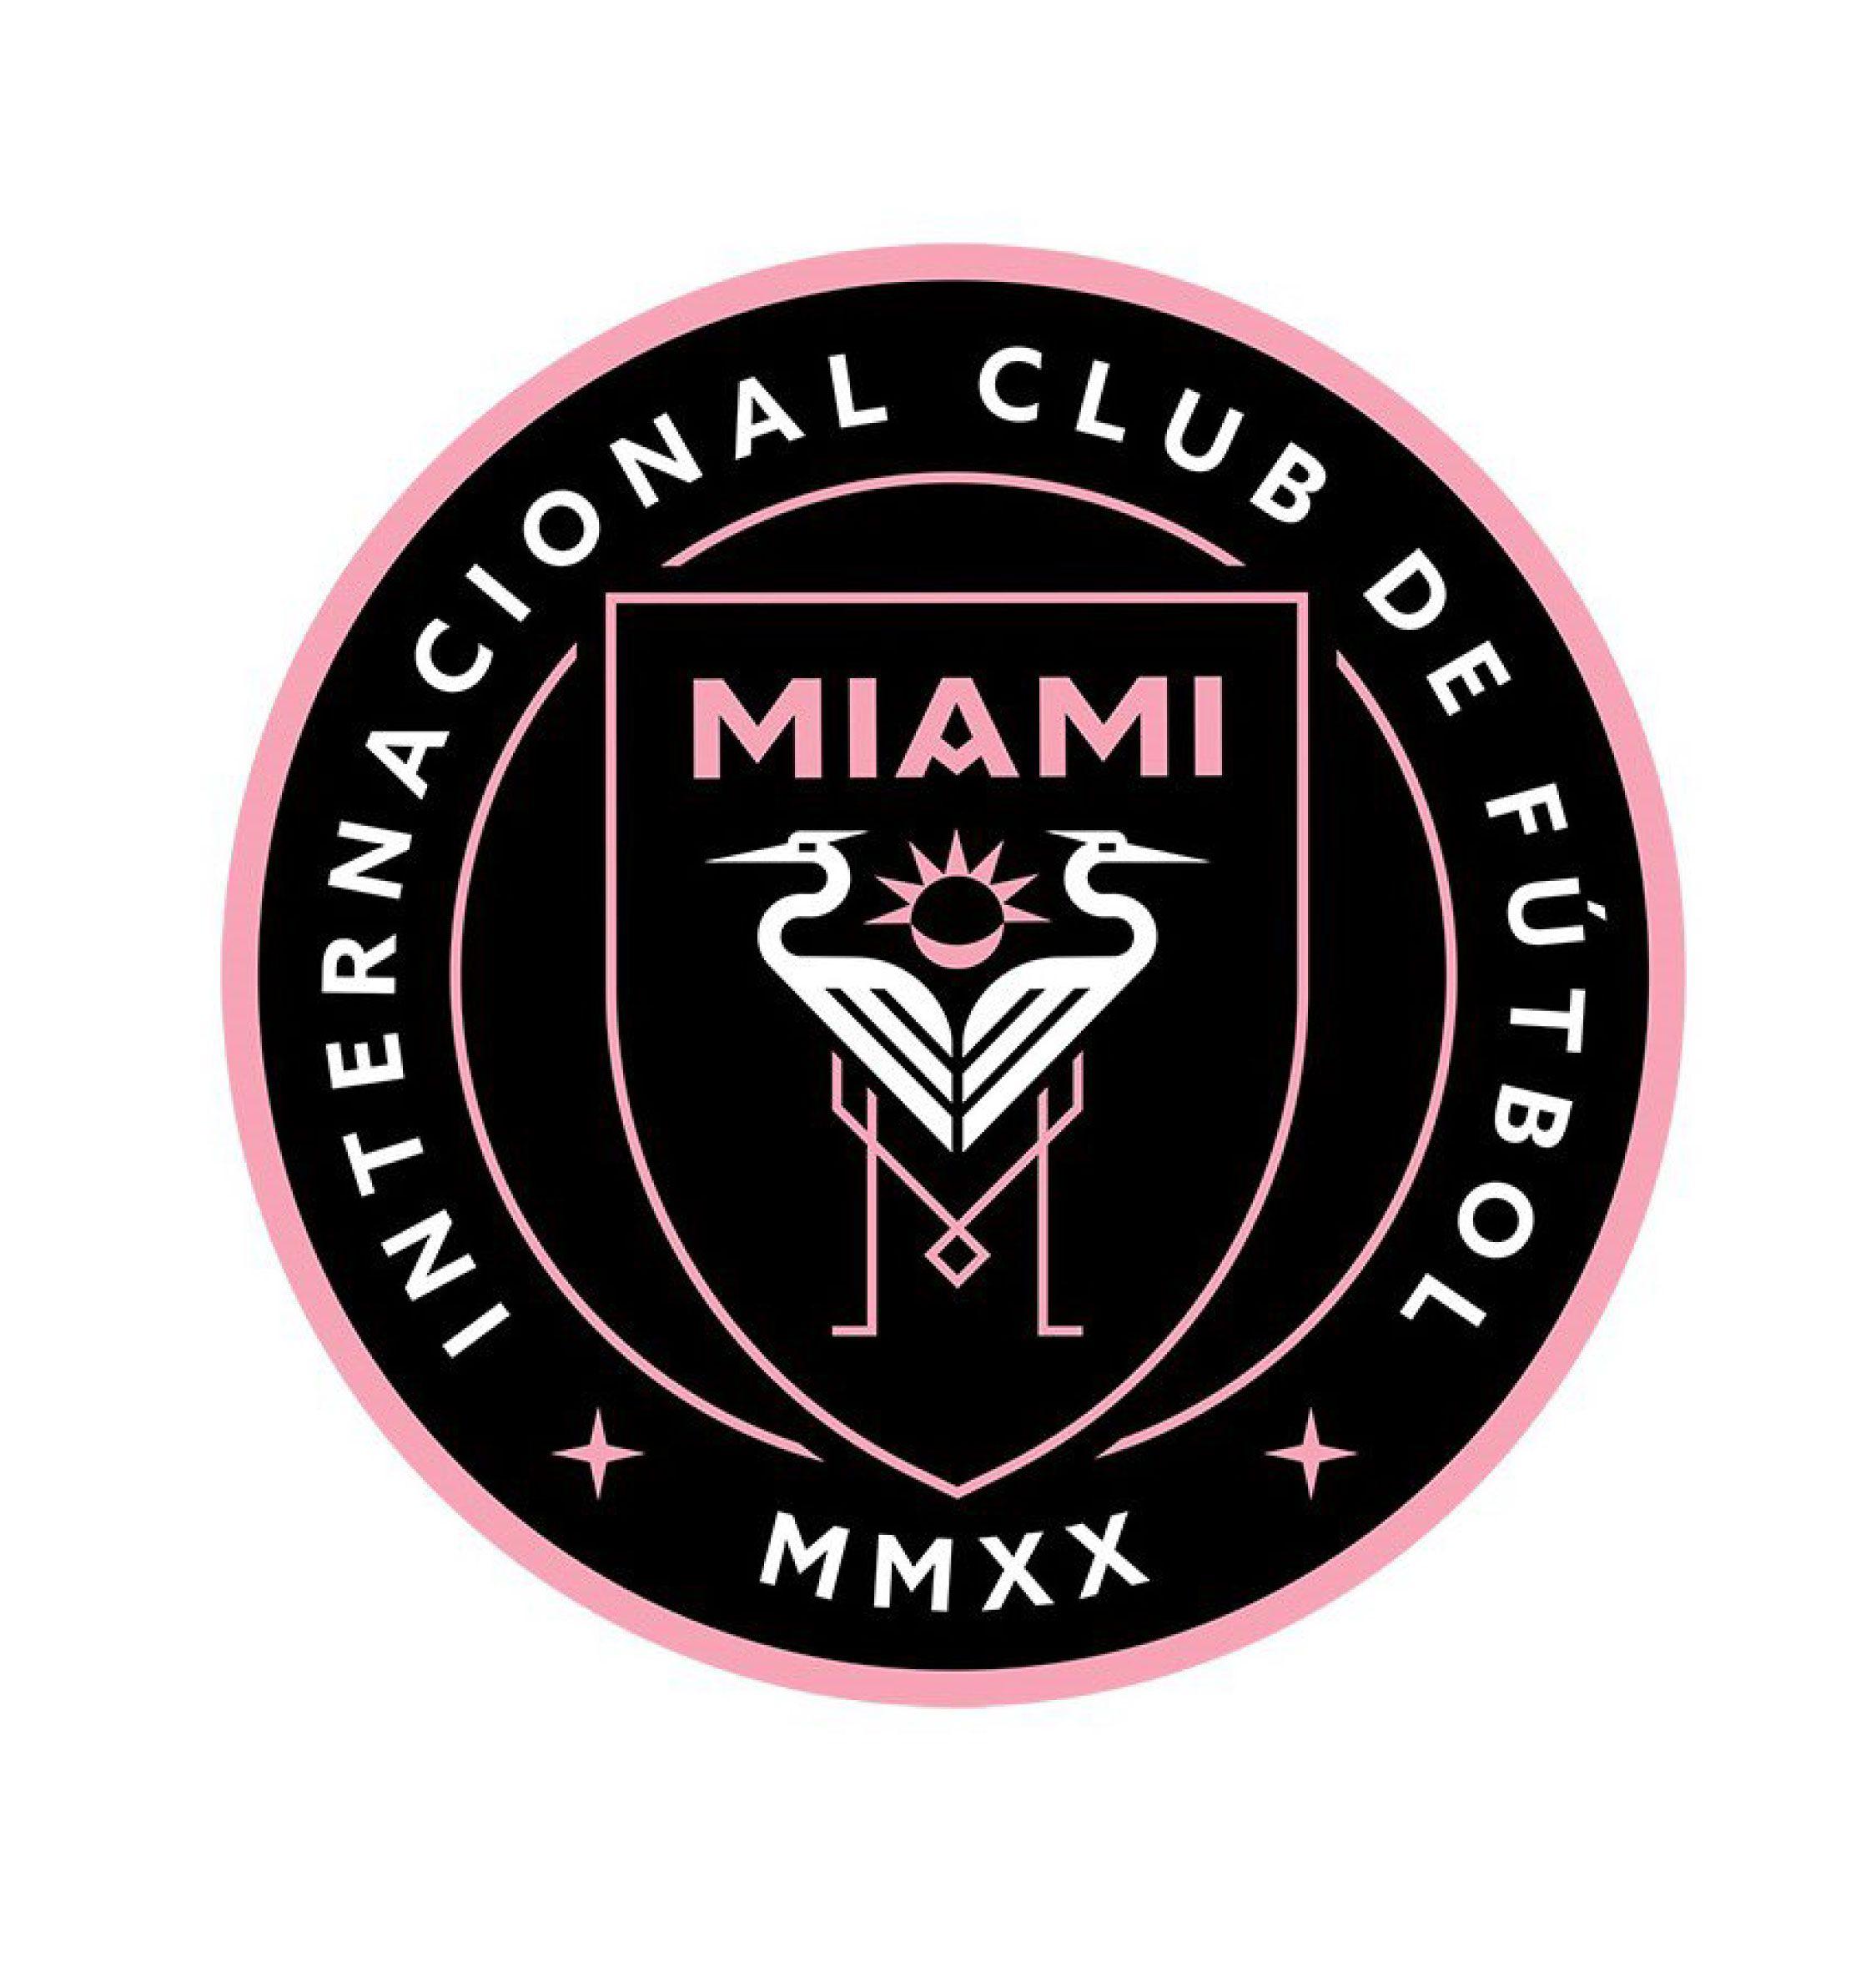 New Football Logo - Could this be the new logo for David Beckham's Miami football club ...